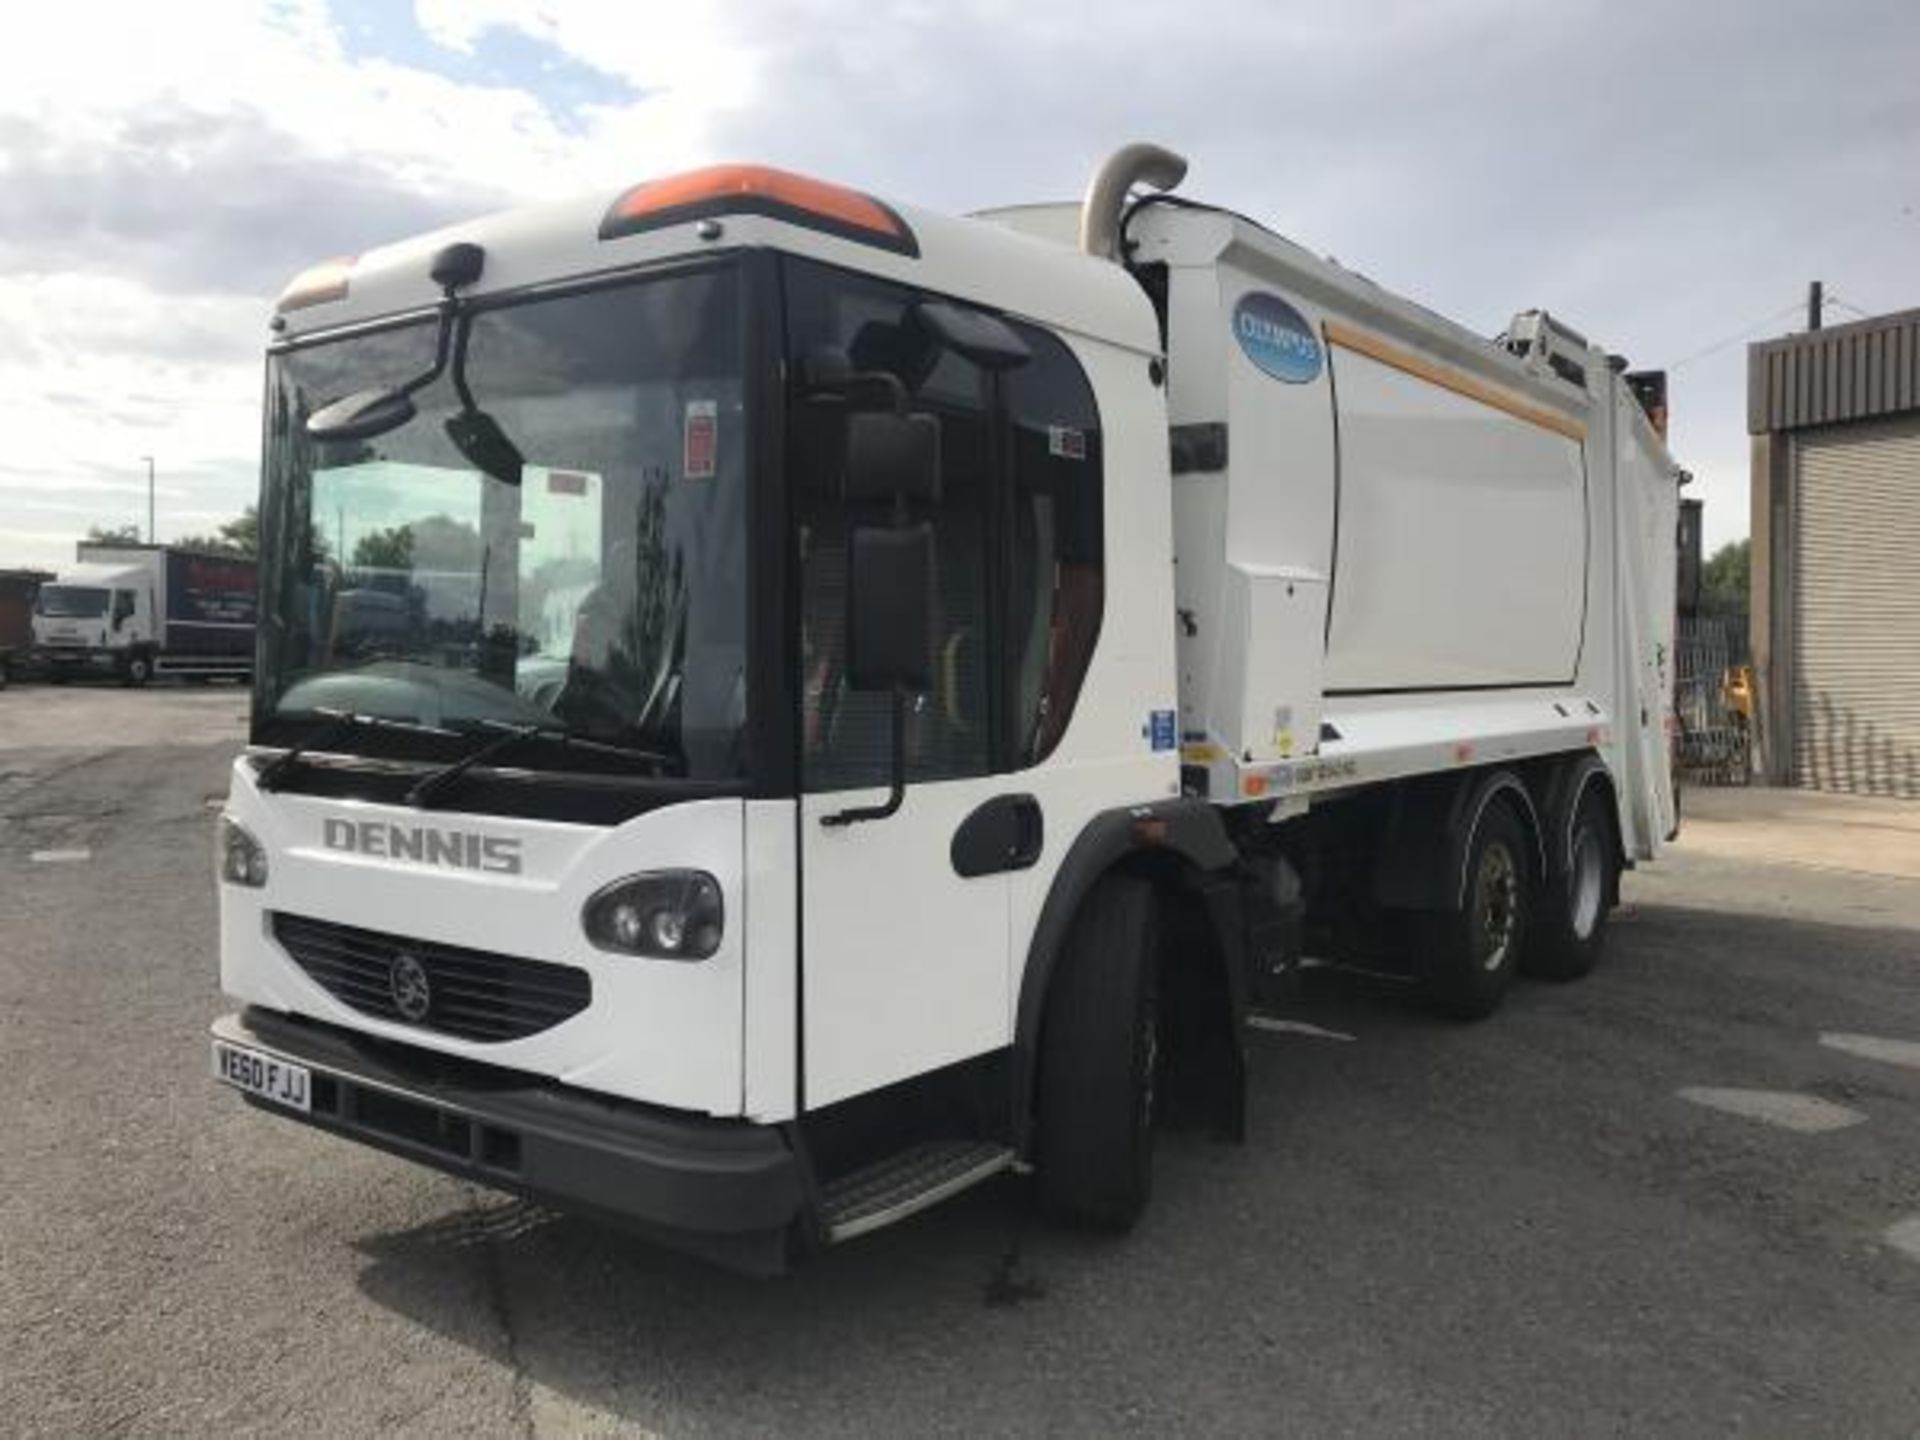 2011 ON 60 PLATE DENNIS ELITE 2 REFUSE TRUCK . EX COUNICL GOOD CONDITION. 109000 MILES OR 177.000KM - Image 2 of 11